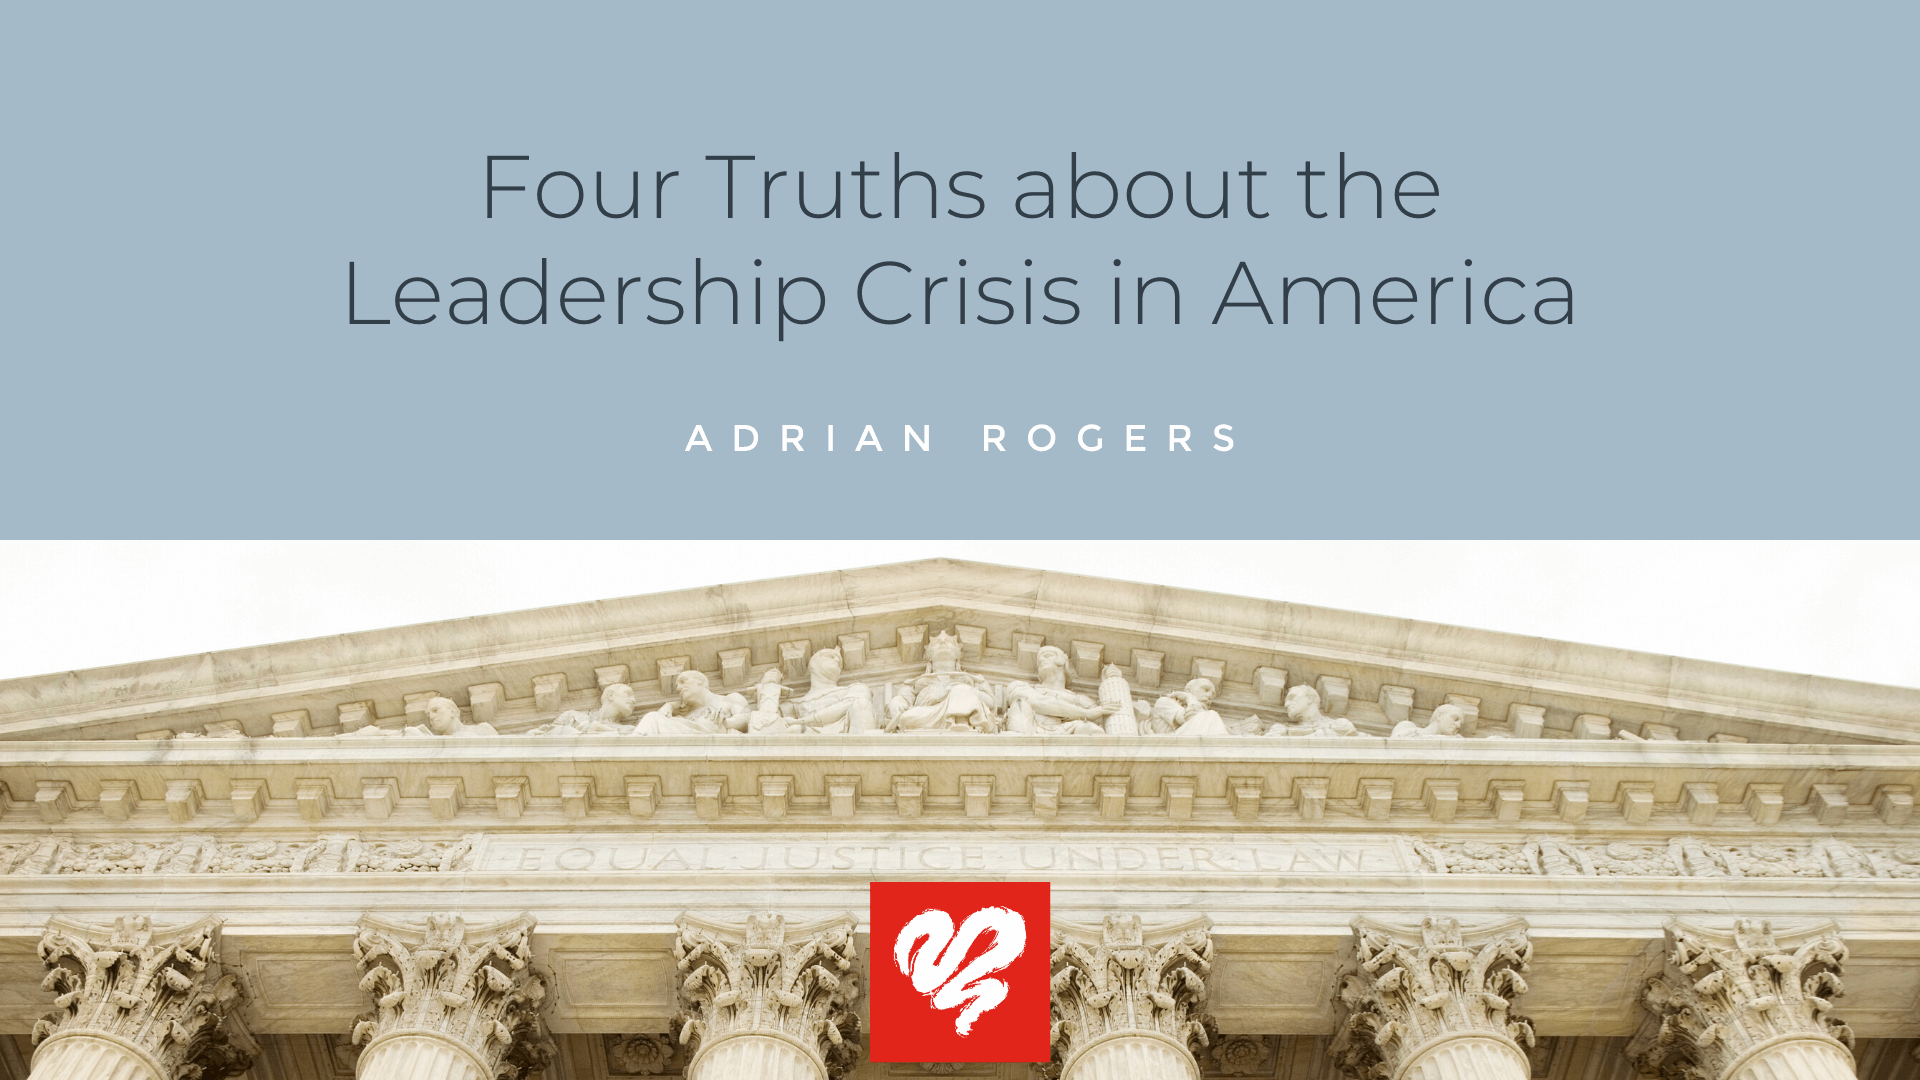 Four Truths about the Leadership Crisis in America